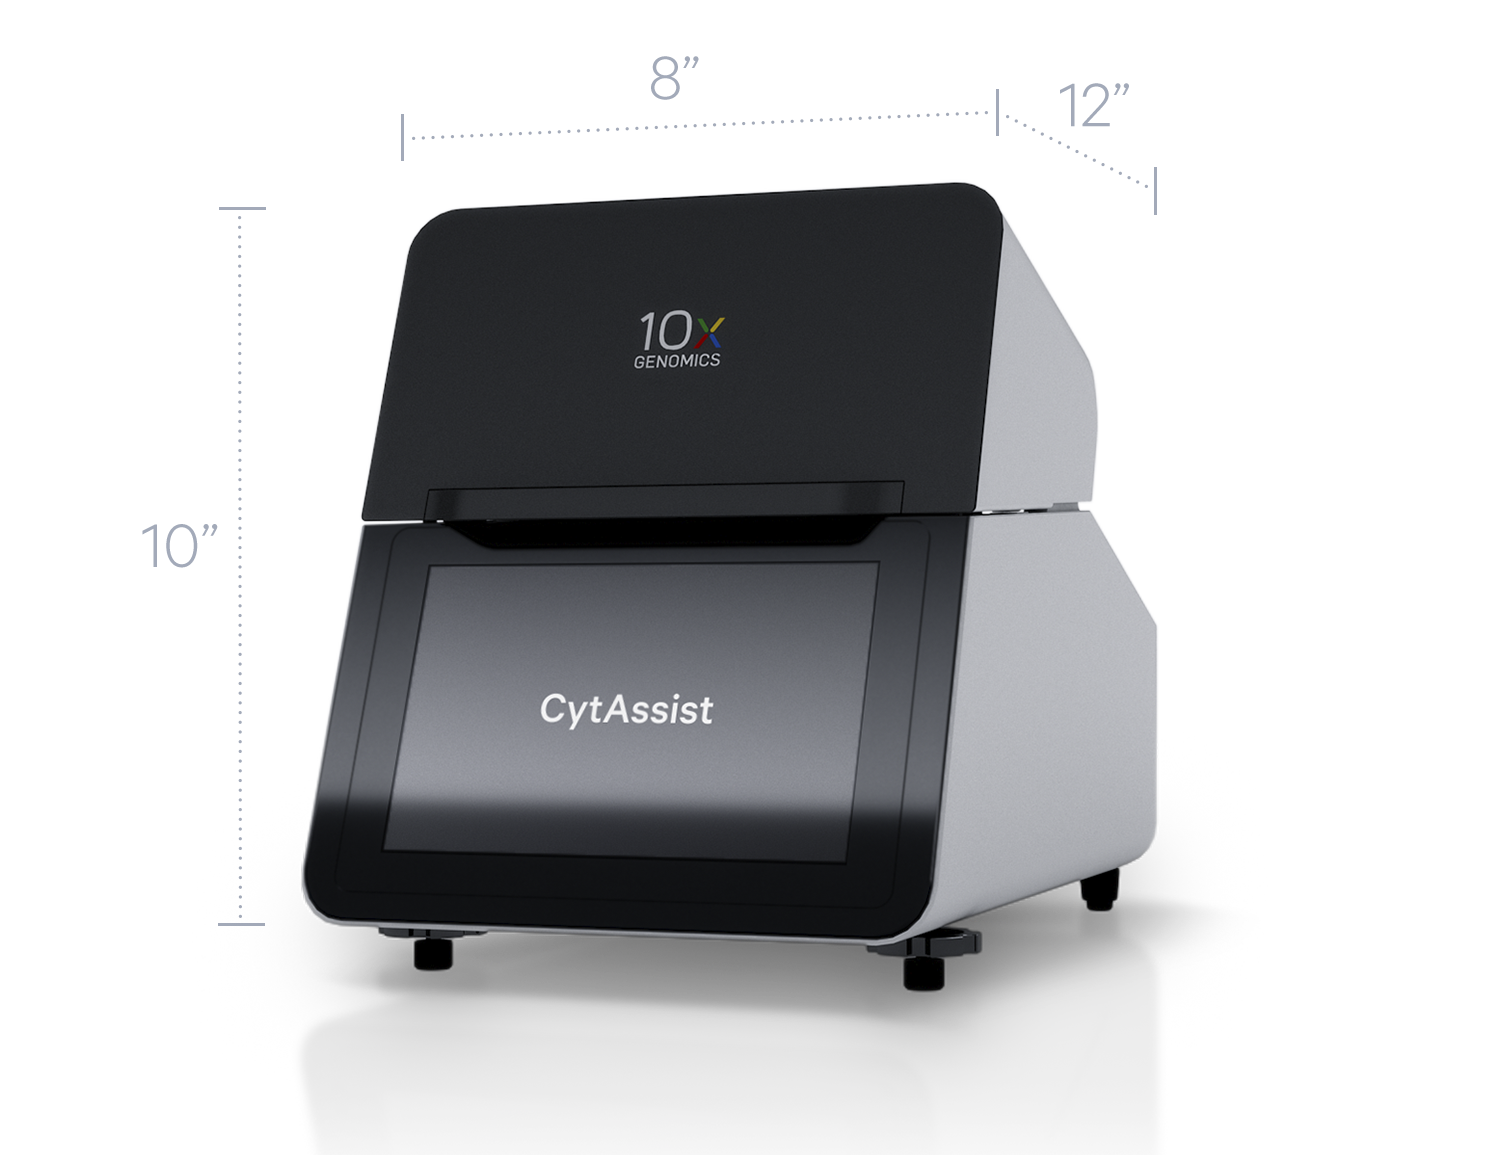 CytAssist instrument with labeled dimensions, 10" x 8" x 12"